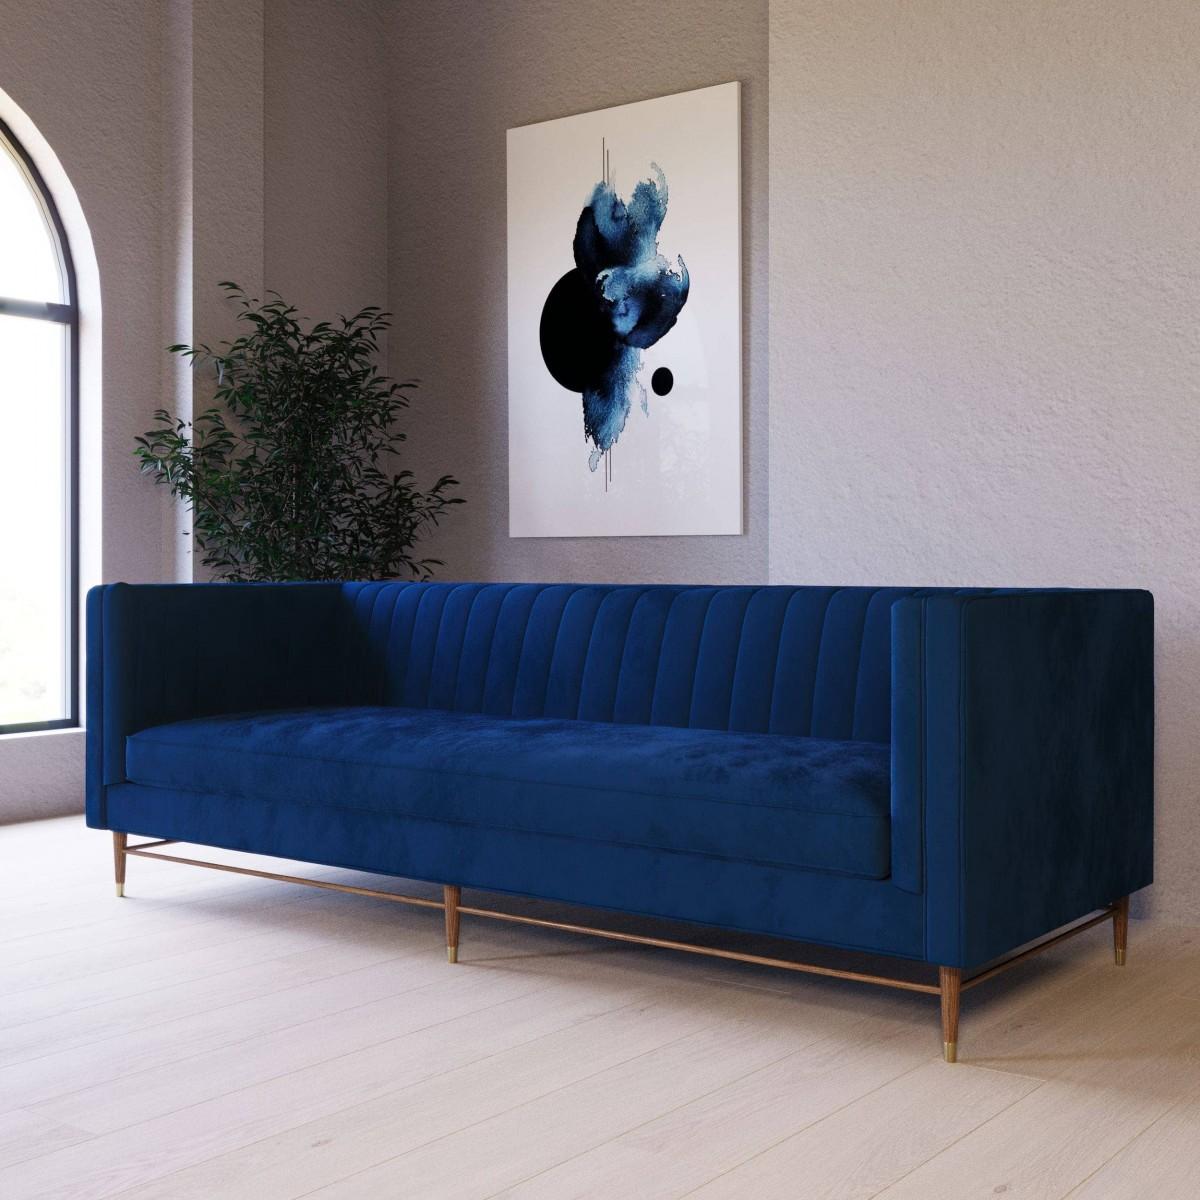 Contemporary, Modern Sofa VGUIMY508 VGUIMY508 in Blue Fabric